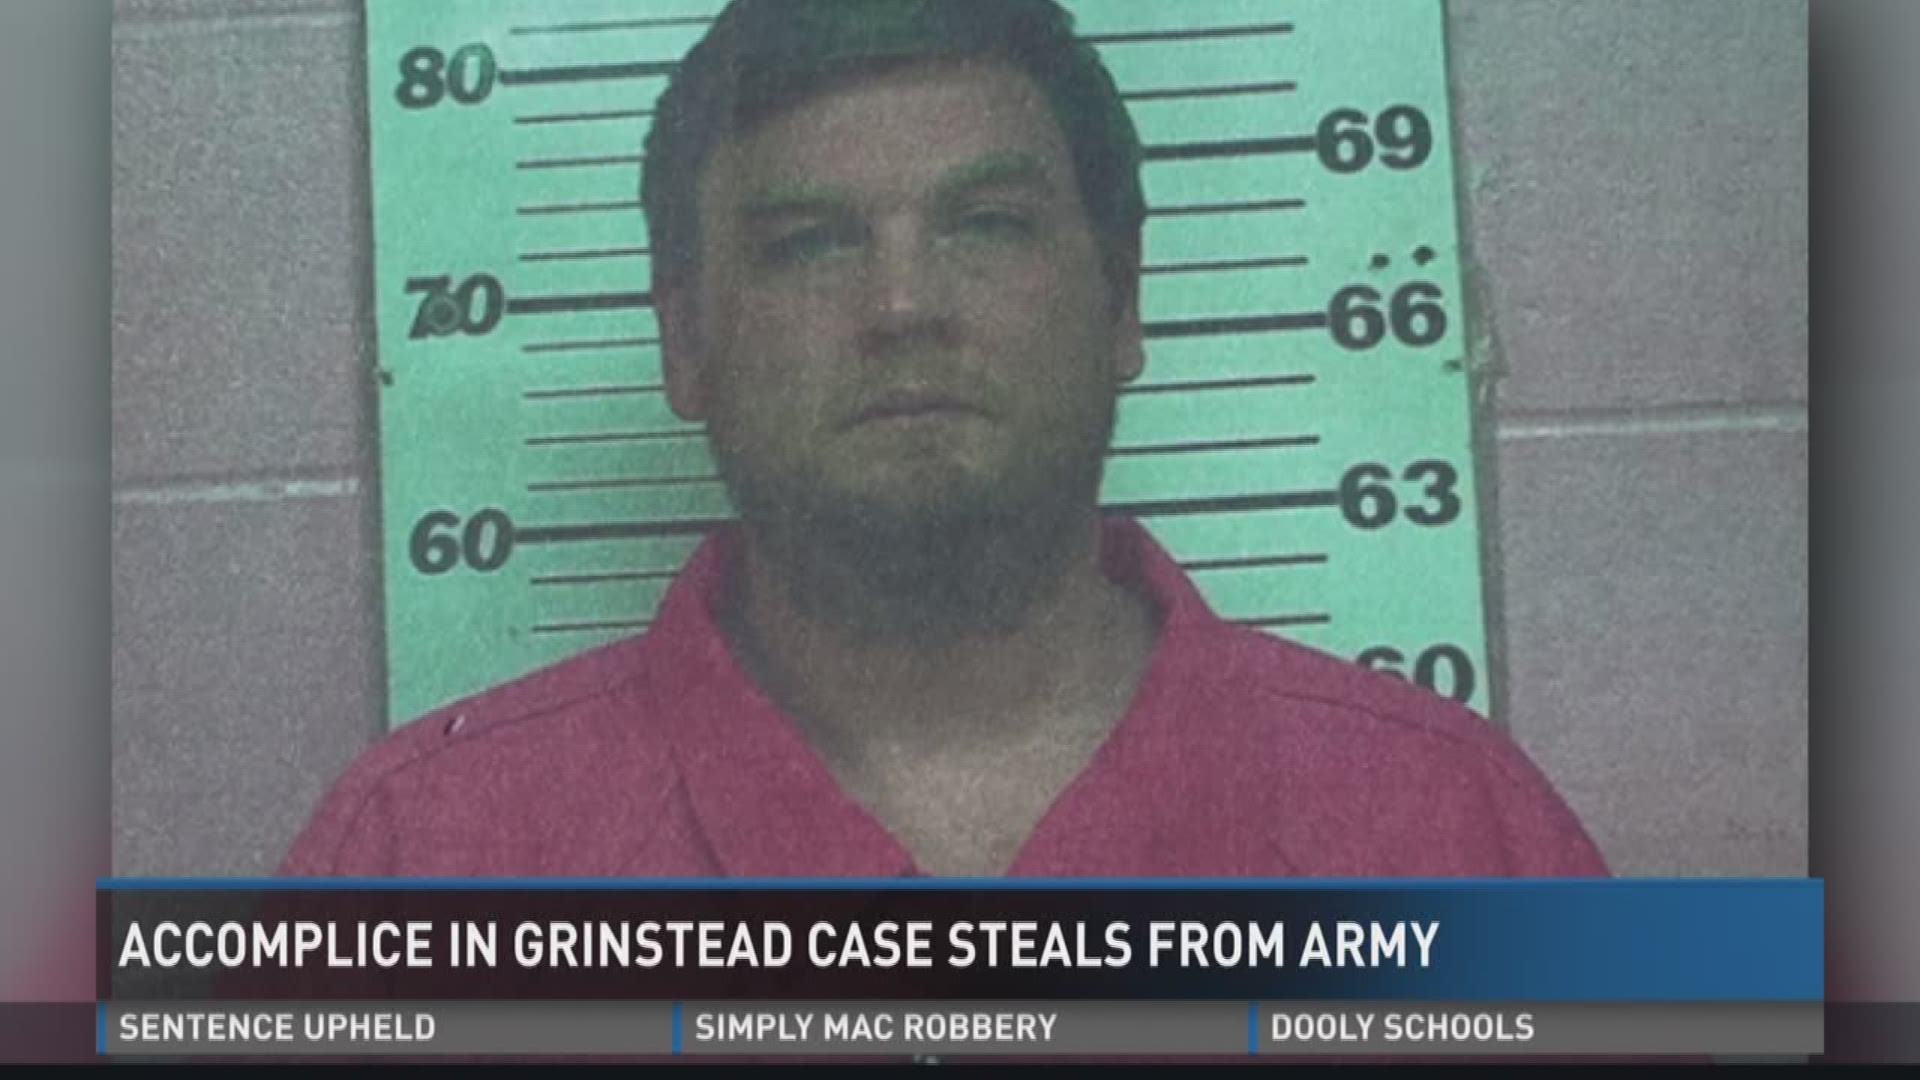 Accomplice in Grinstead case steals from Army